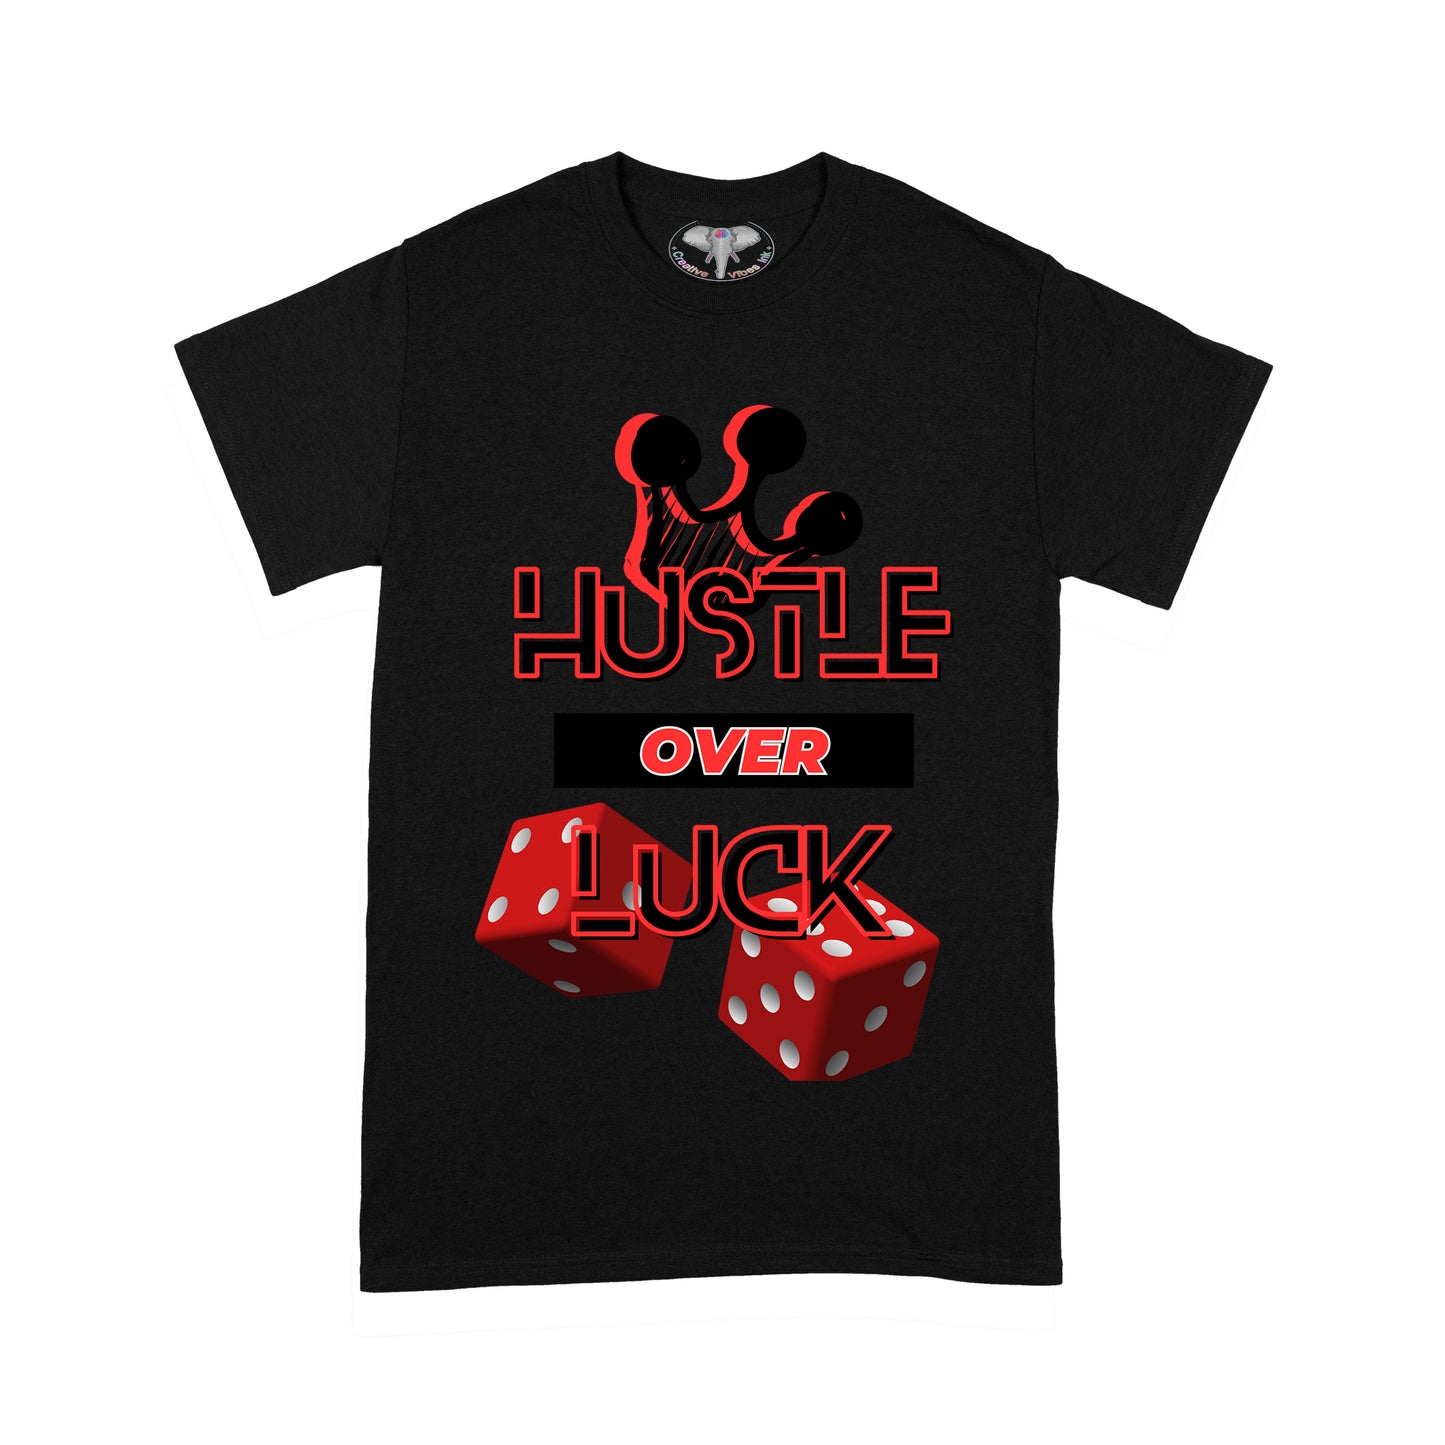 Hustle Over Luck Graphic T-shirt